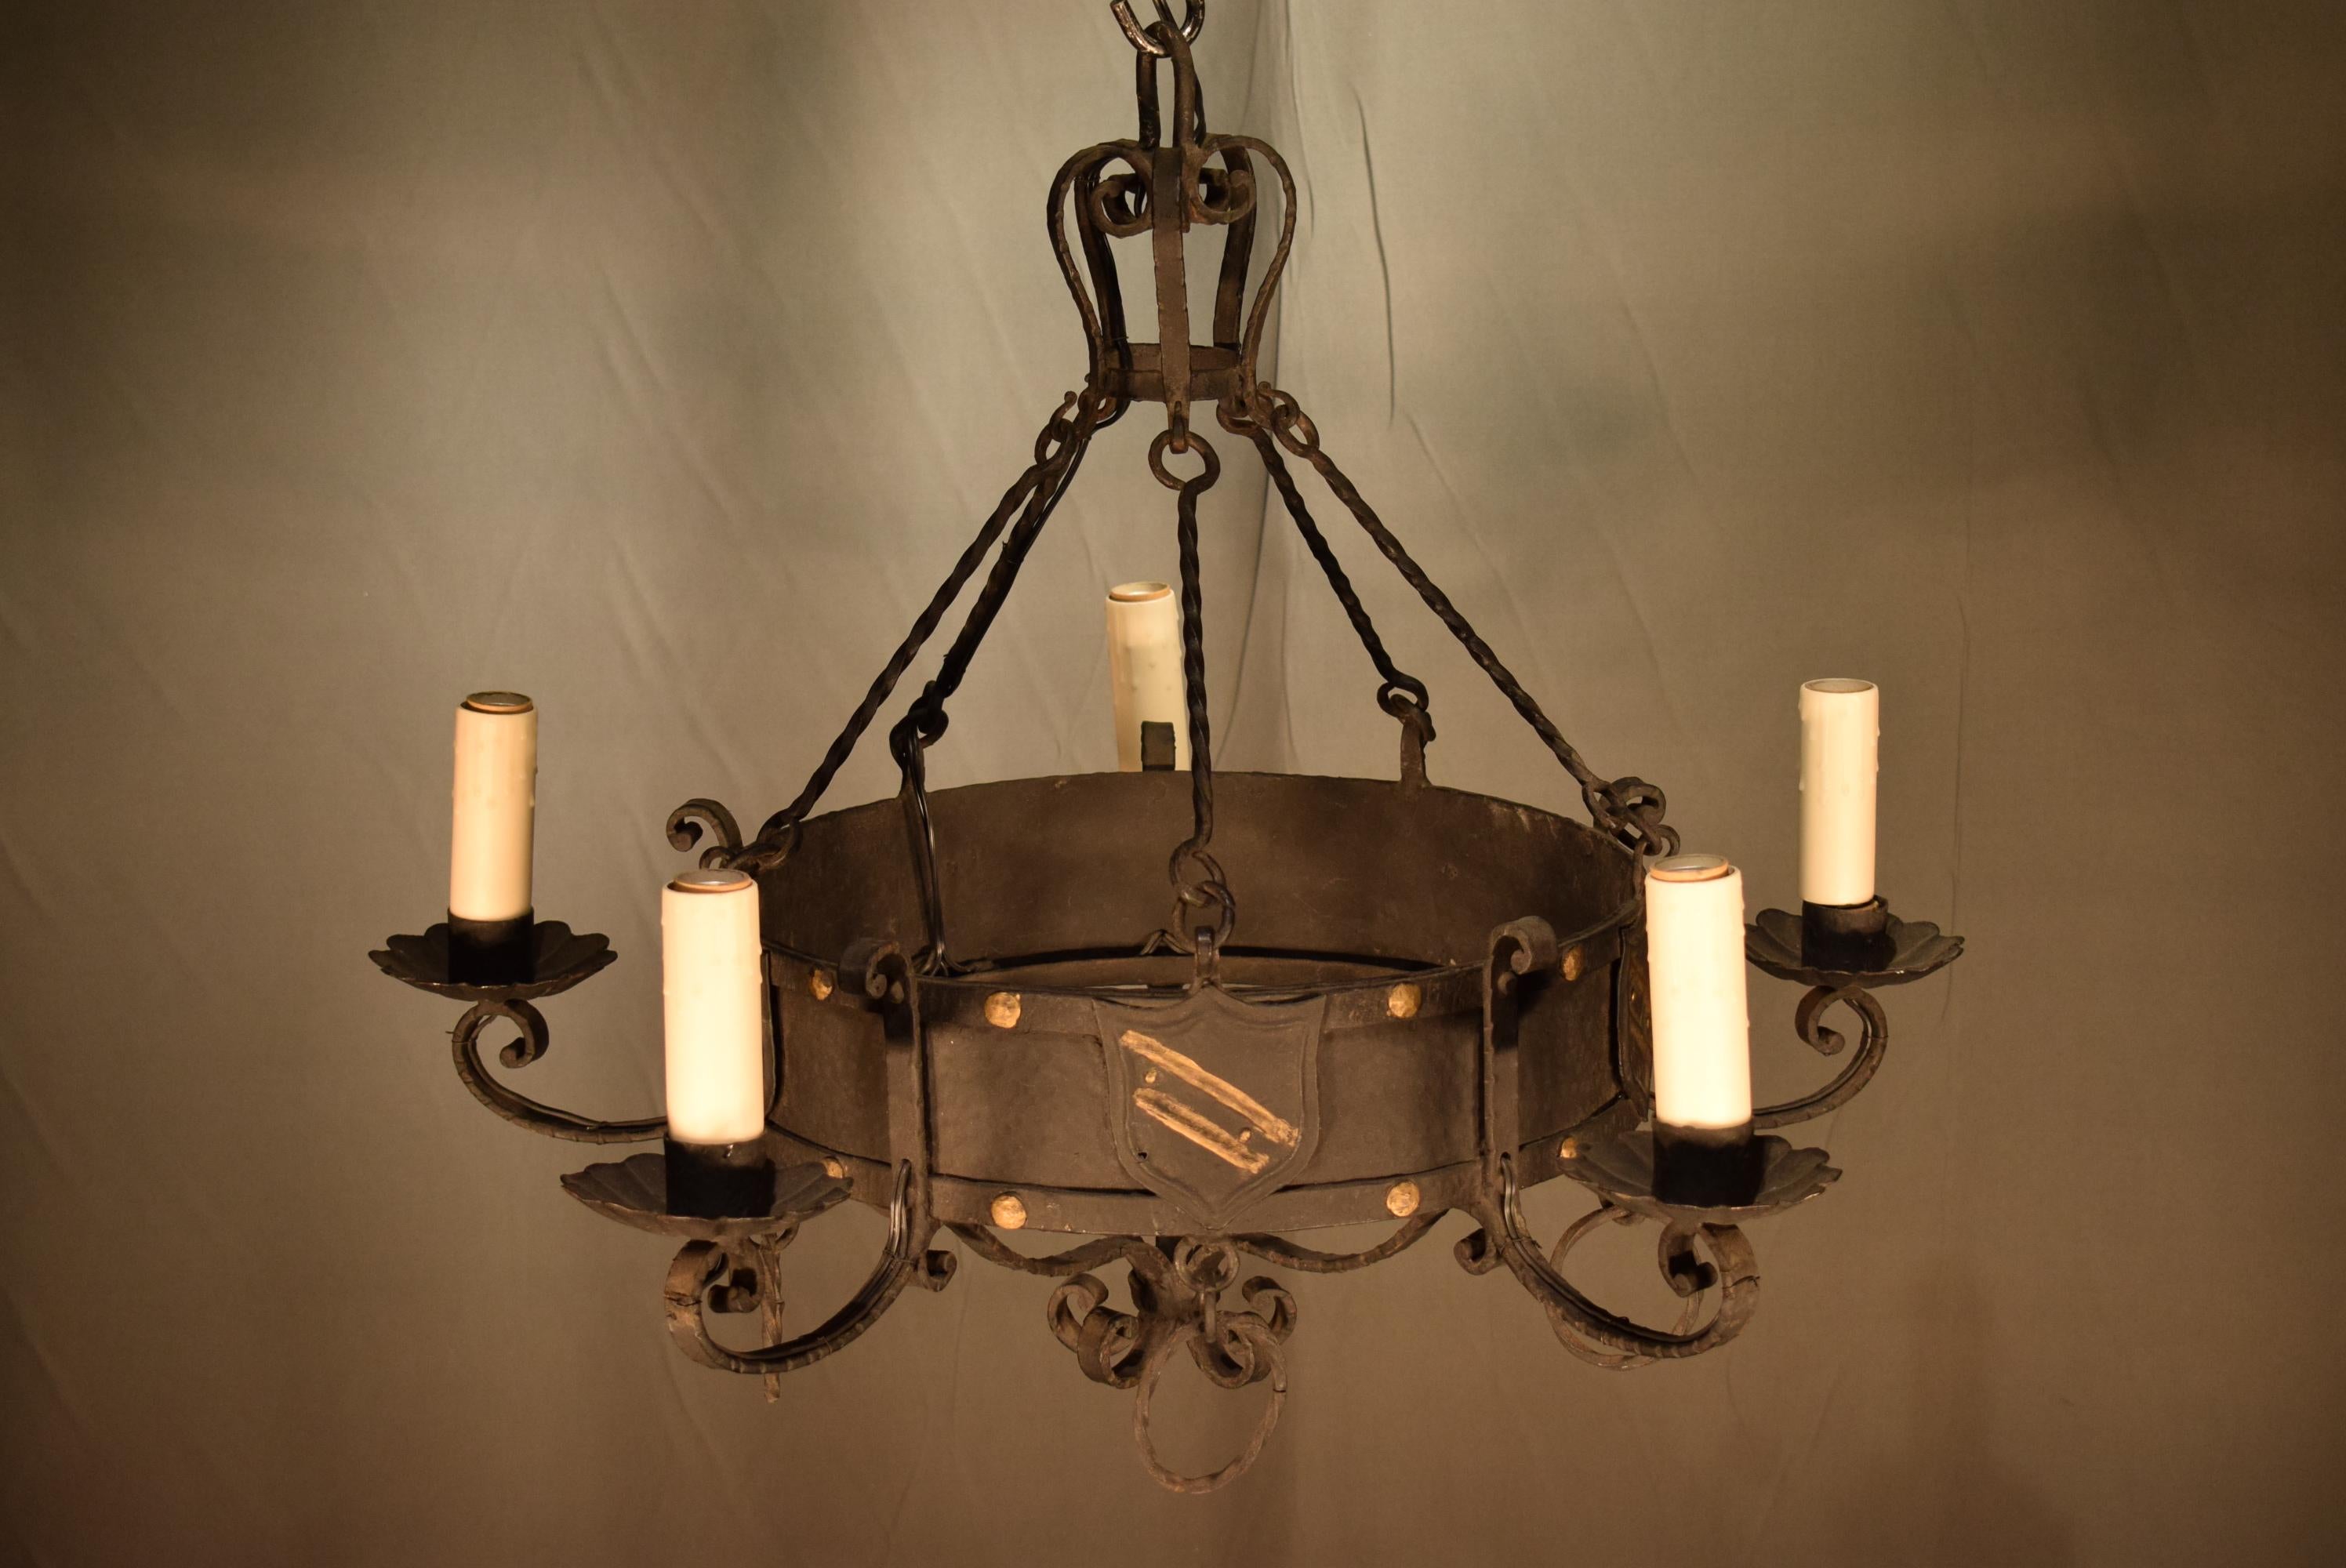 A fine Tudor style iron chandelier, France, circa 1940
5 lights
Dimensions: Height 24